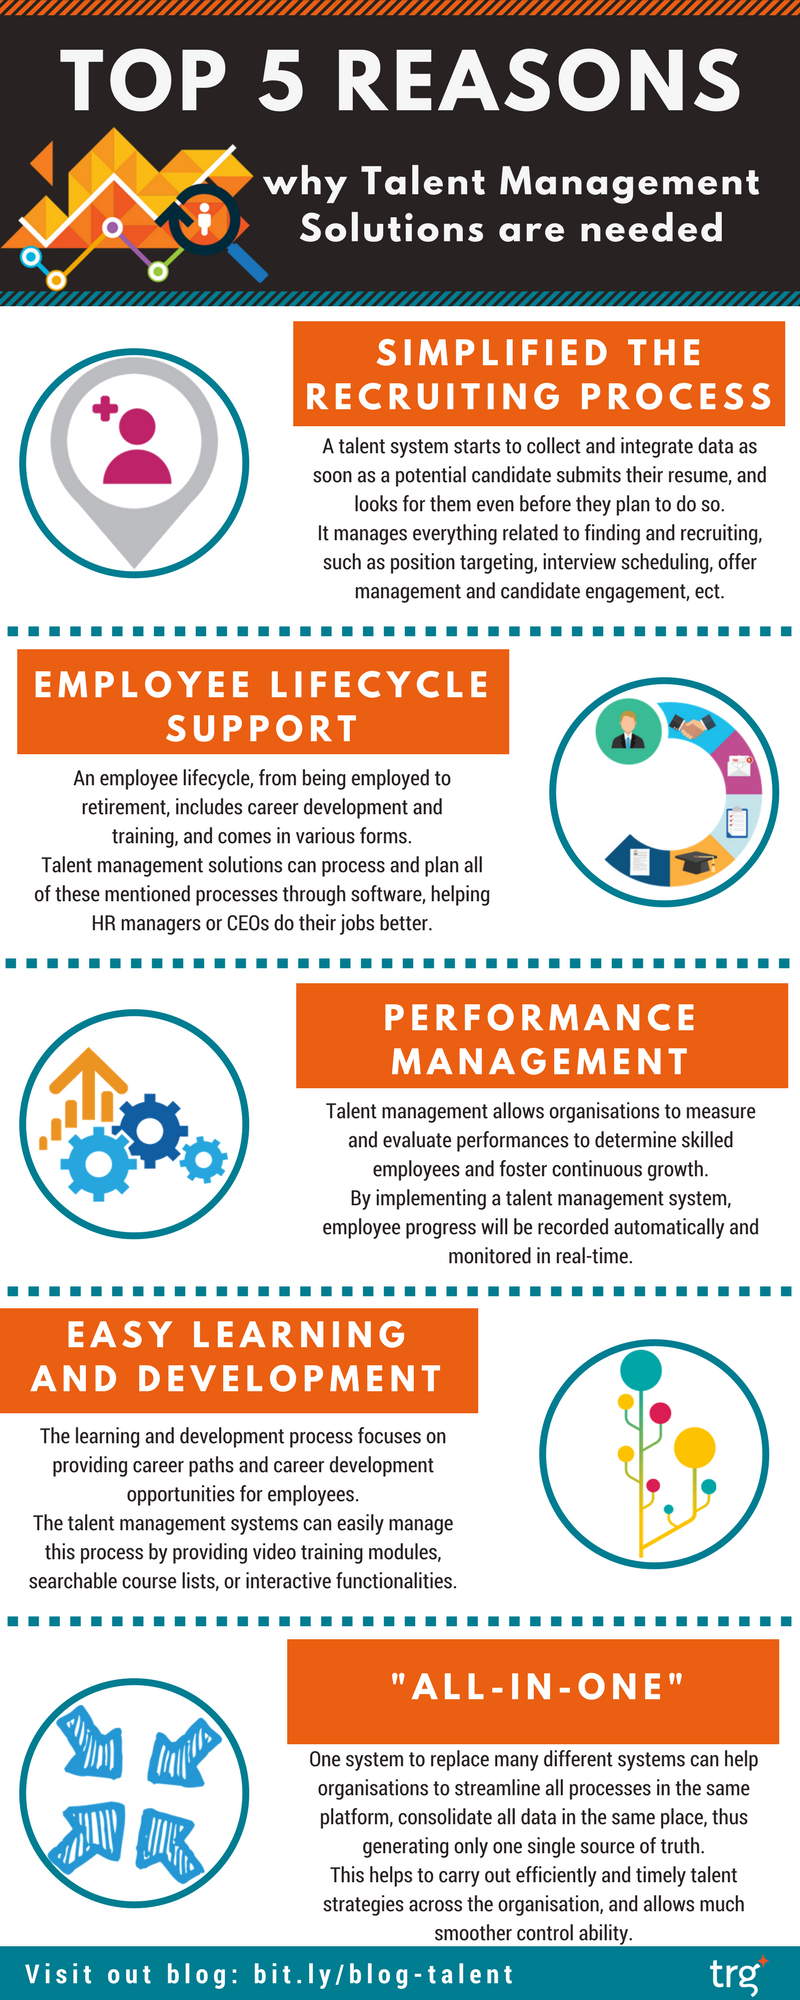 Reasons to apply a talent management system If your organisation’s HR department is trying hard to track the employee's lifecycle and the results are not positive, maybe it’s time to apply talent management solutions. Here are five reasons why talent management systems are needed